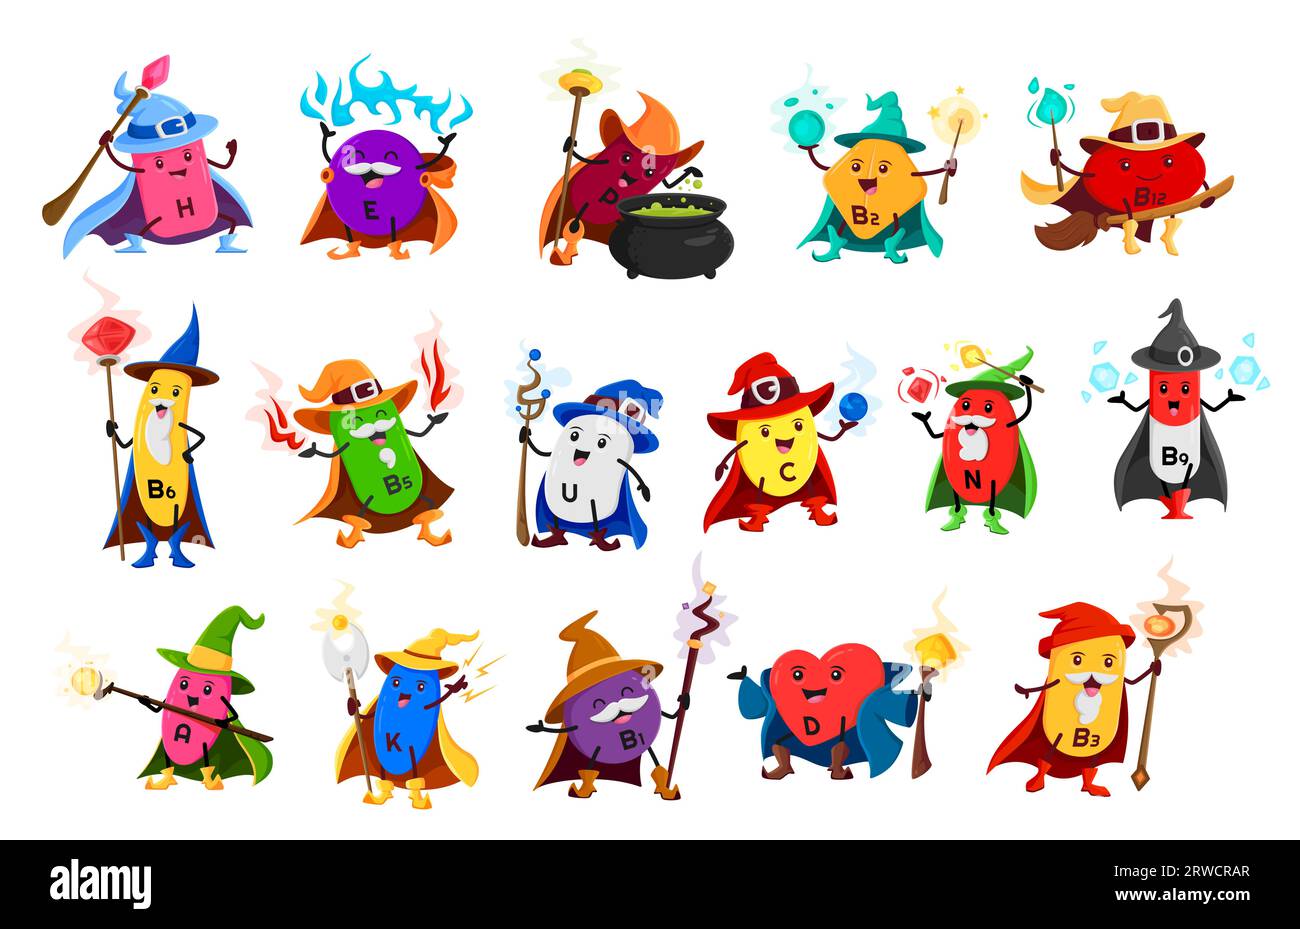 Cartoon vitamin and micronutrient wizards, mages, magicians and sorcerer characters. Vector U, C and E. P, N, B1, A and H with D, K and B9, B3 and B6 magician personages wear witch attire Stock Vector